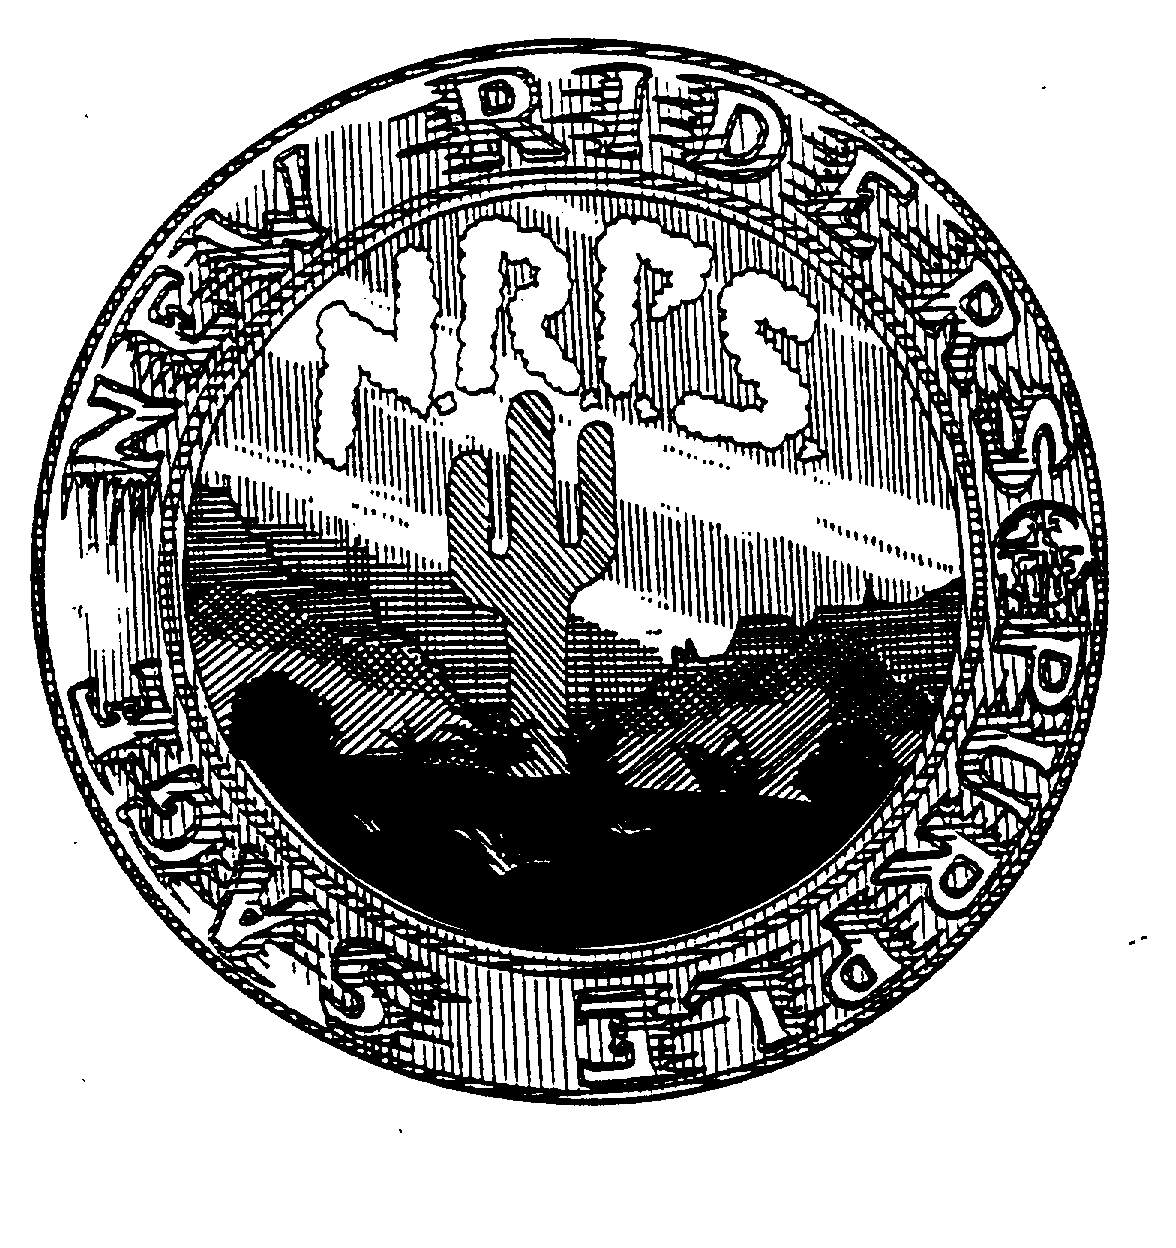  NRPS NEW RIDERS OF THE PURPLE SAGE